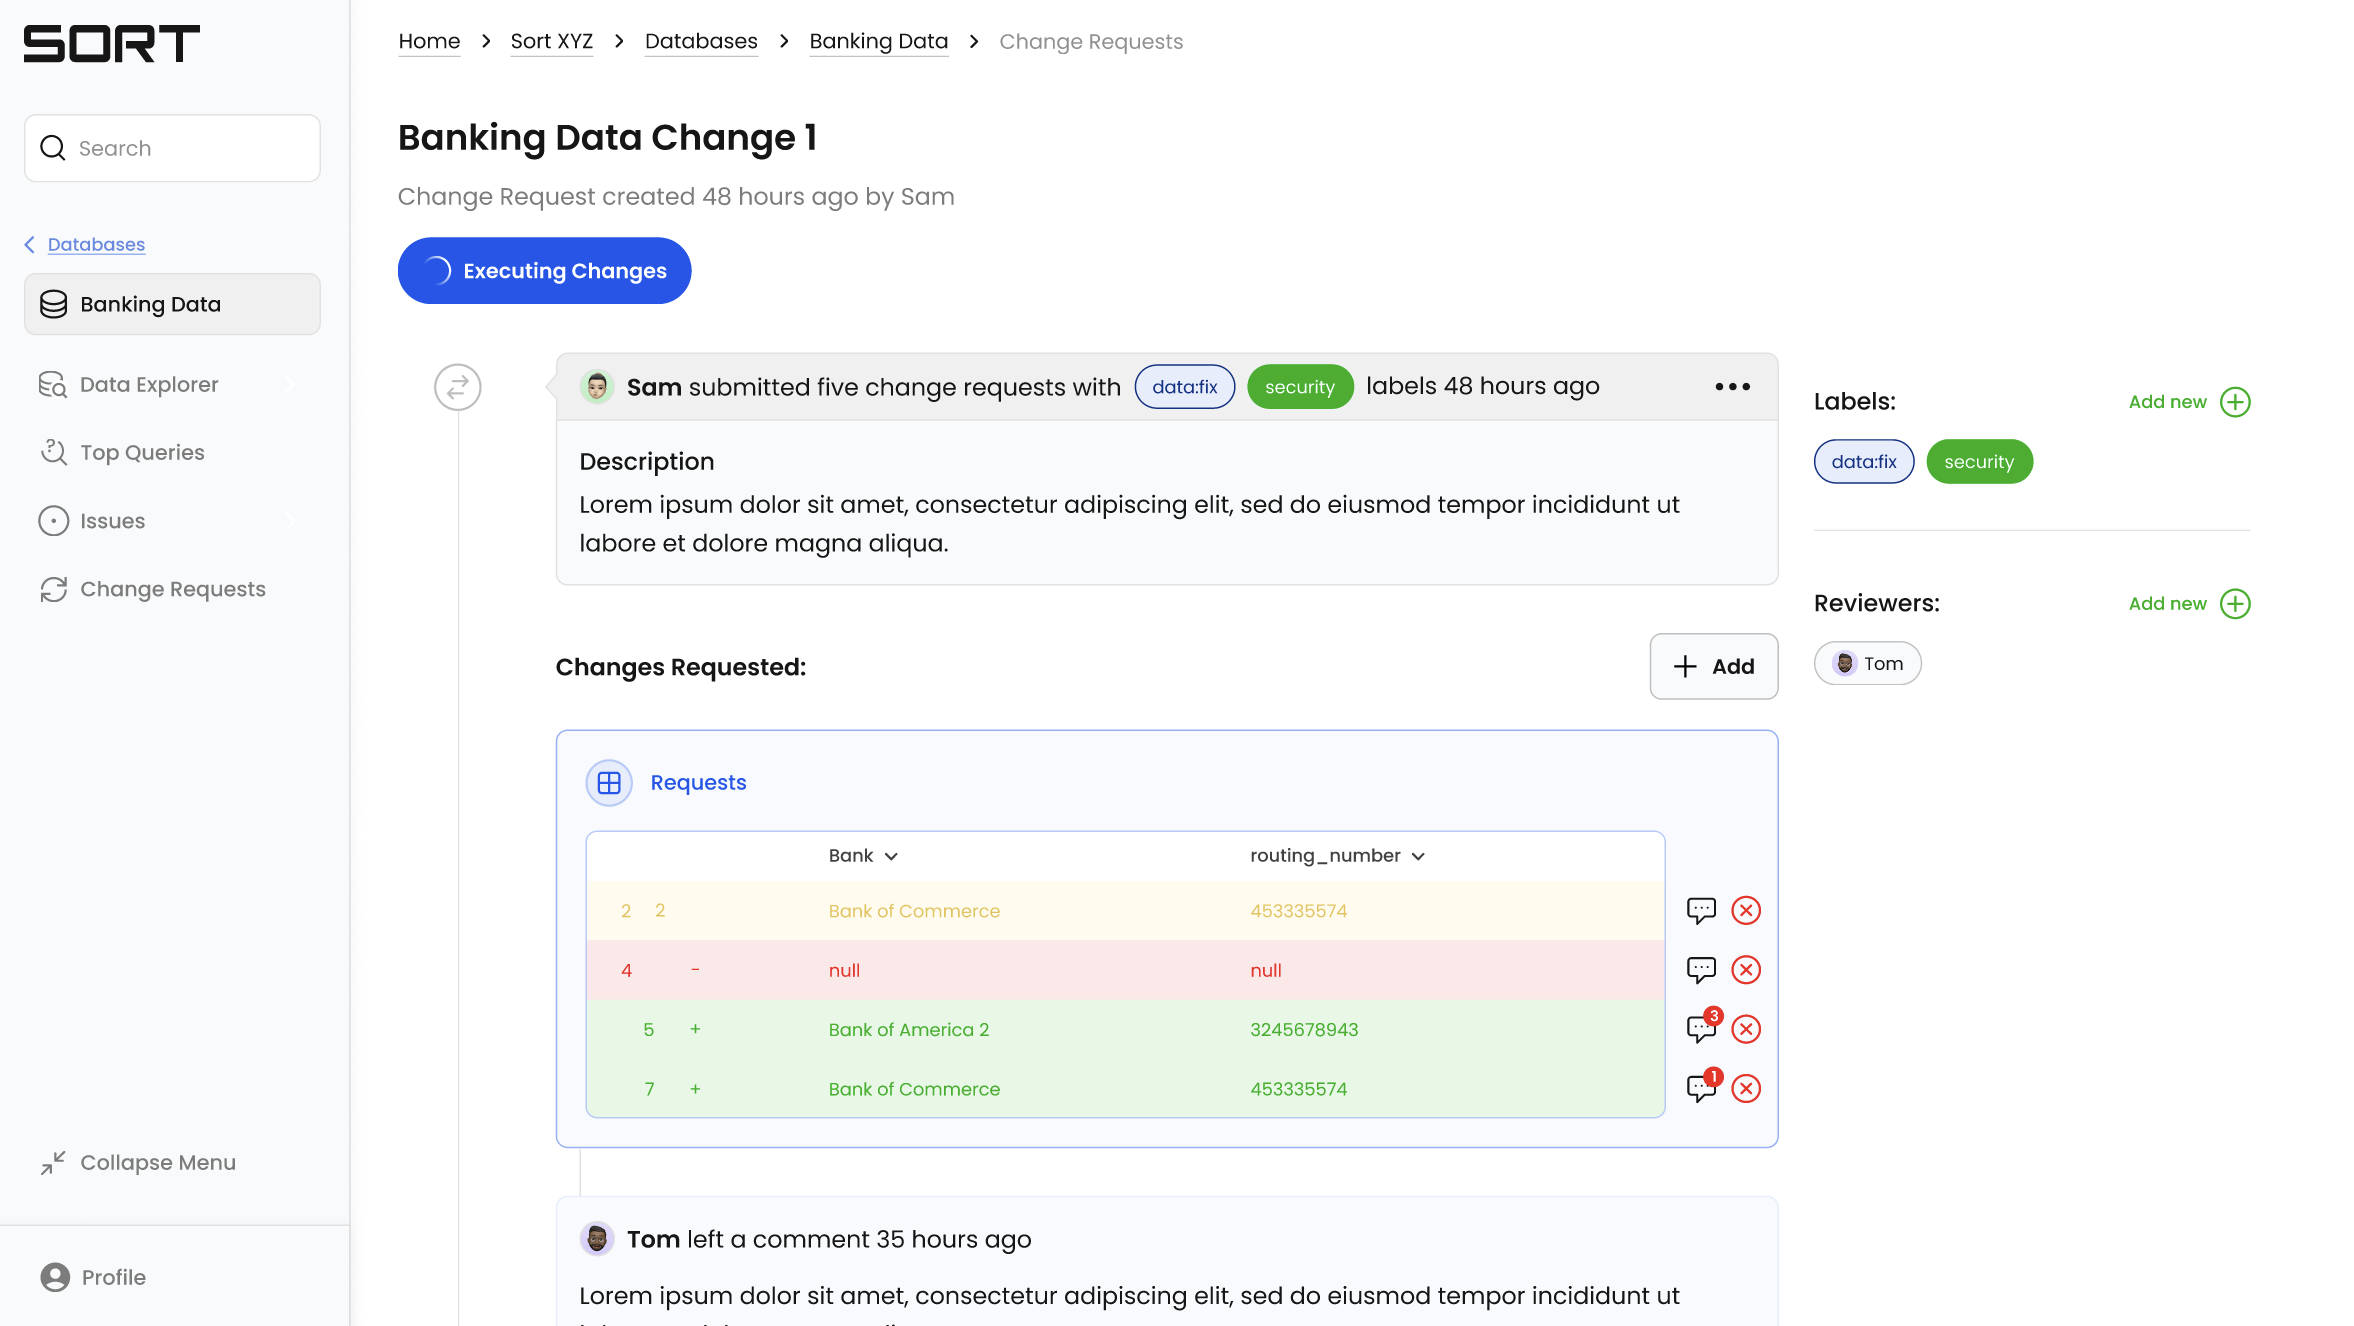 Change Request applying changes to the underlying database